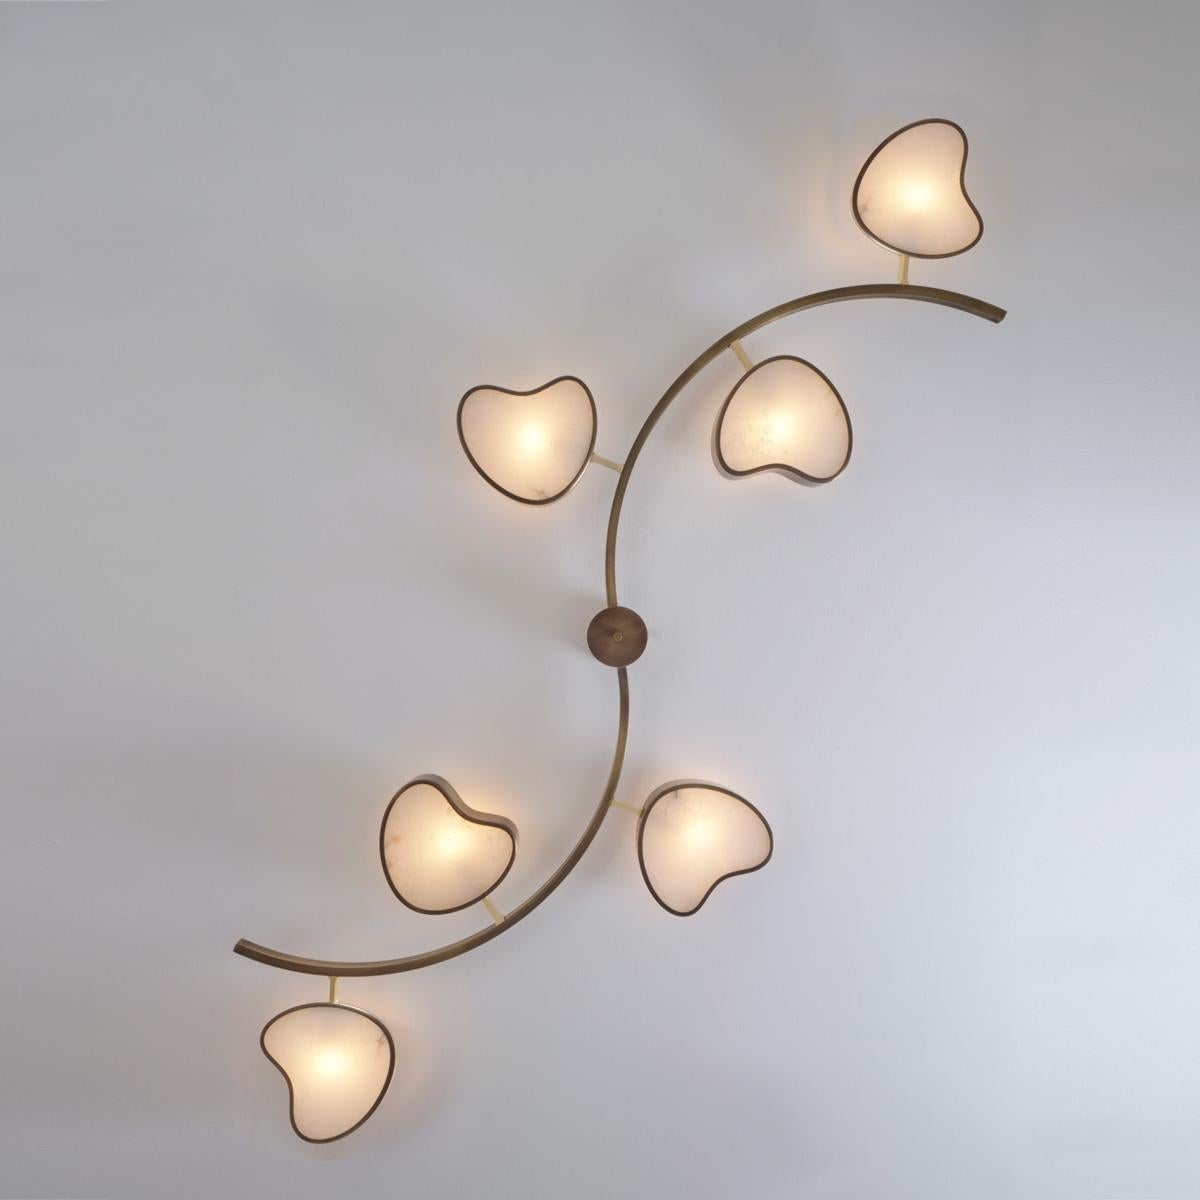 Italian Cuore N.6 Ceiling Light by Gaspare Asaro. Bronze and Satin Brass Finish For Sale